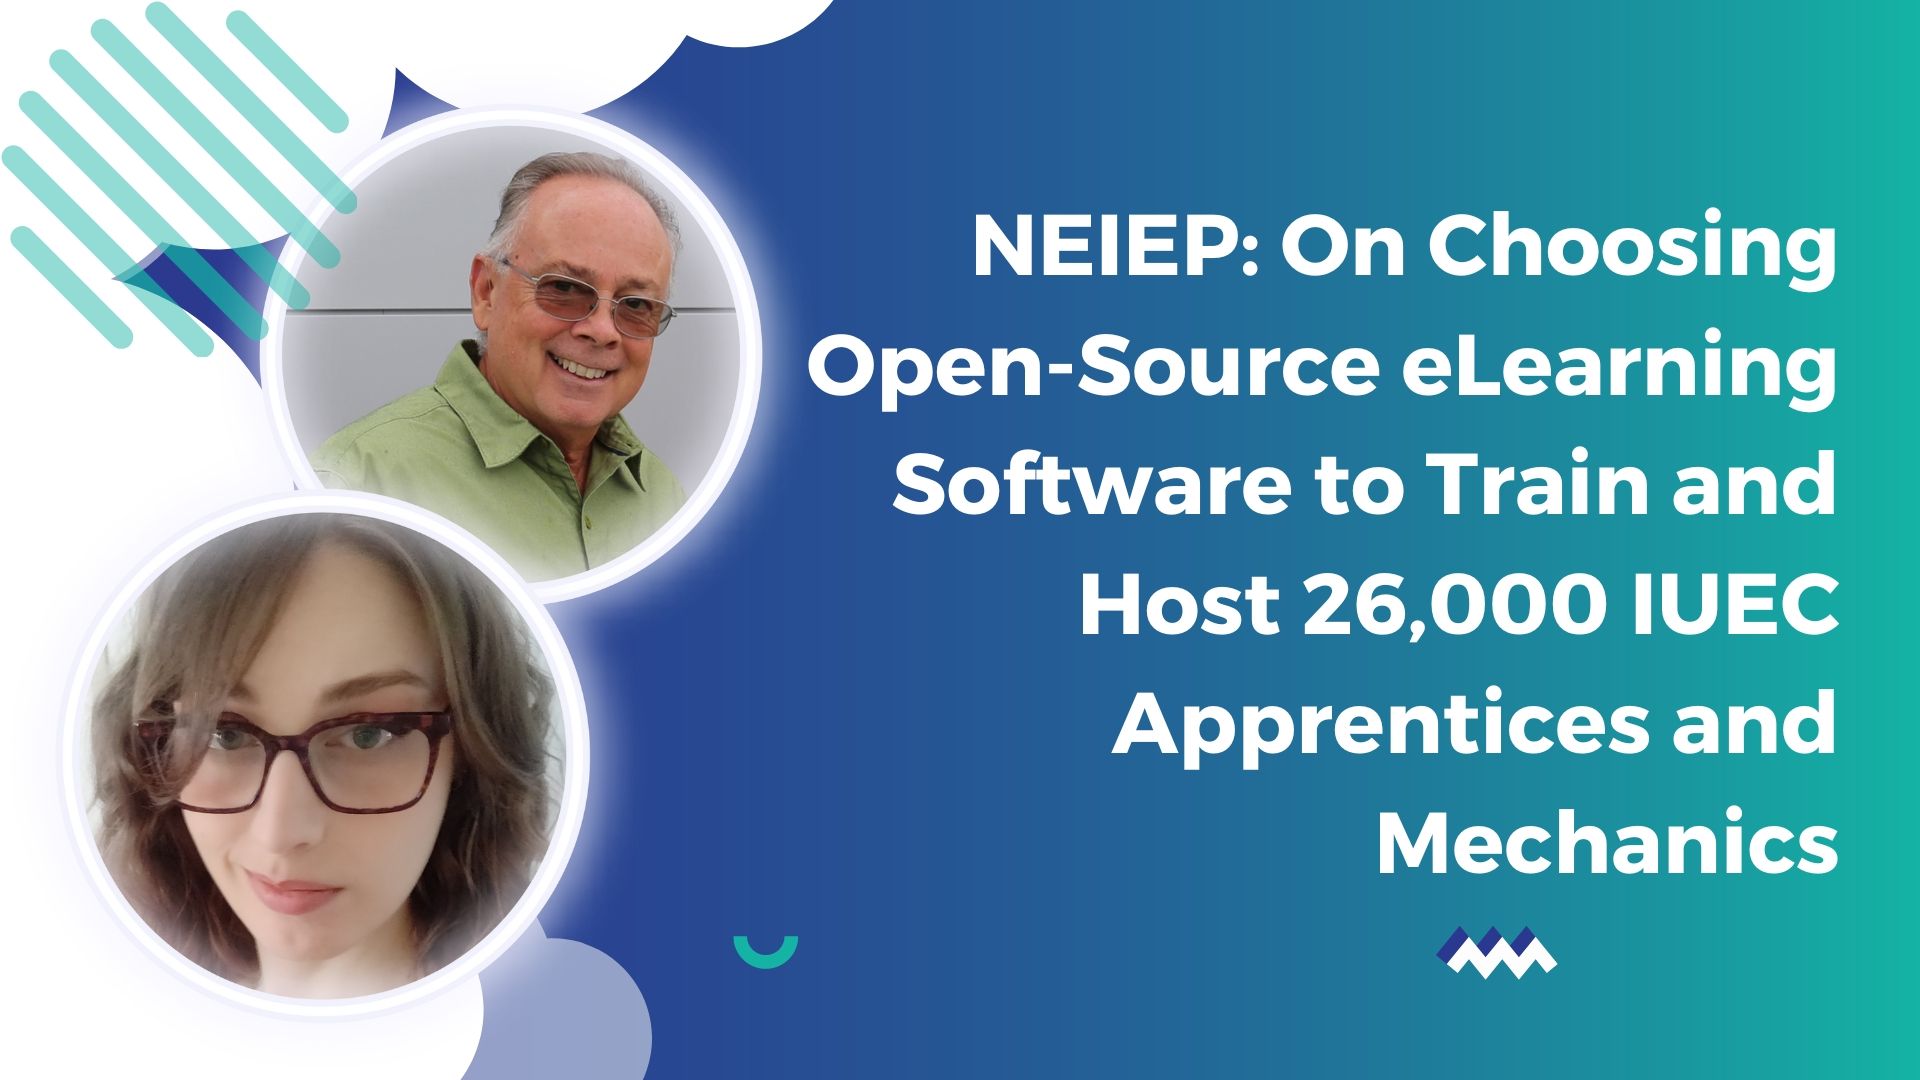 NEIEP: On Choosing Open-Source eLearning Software to Train and Host 26,000 Apprentices and Mechanics